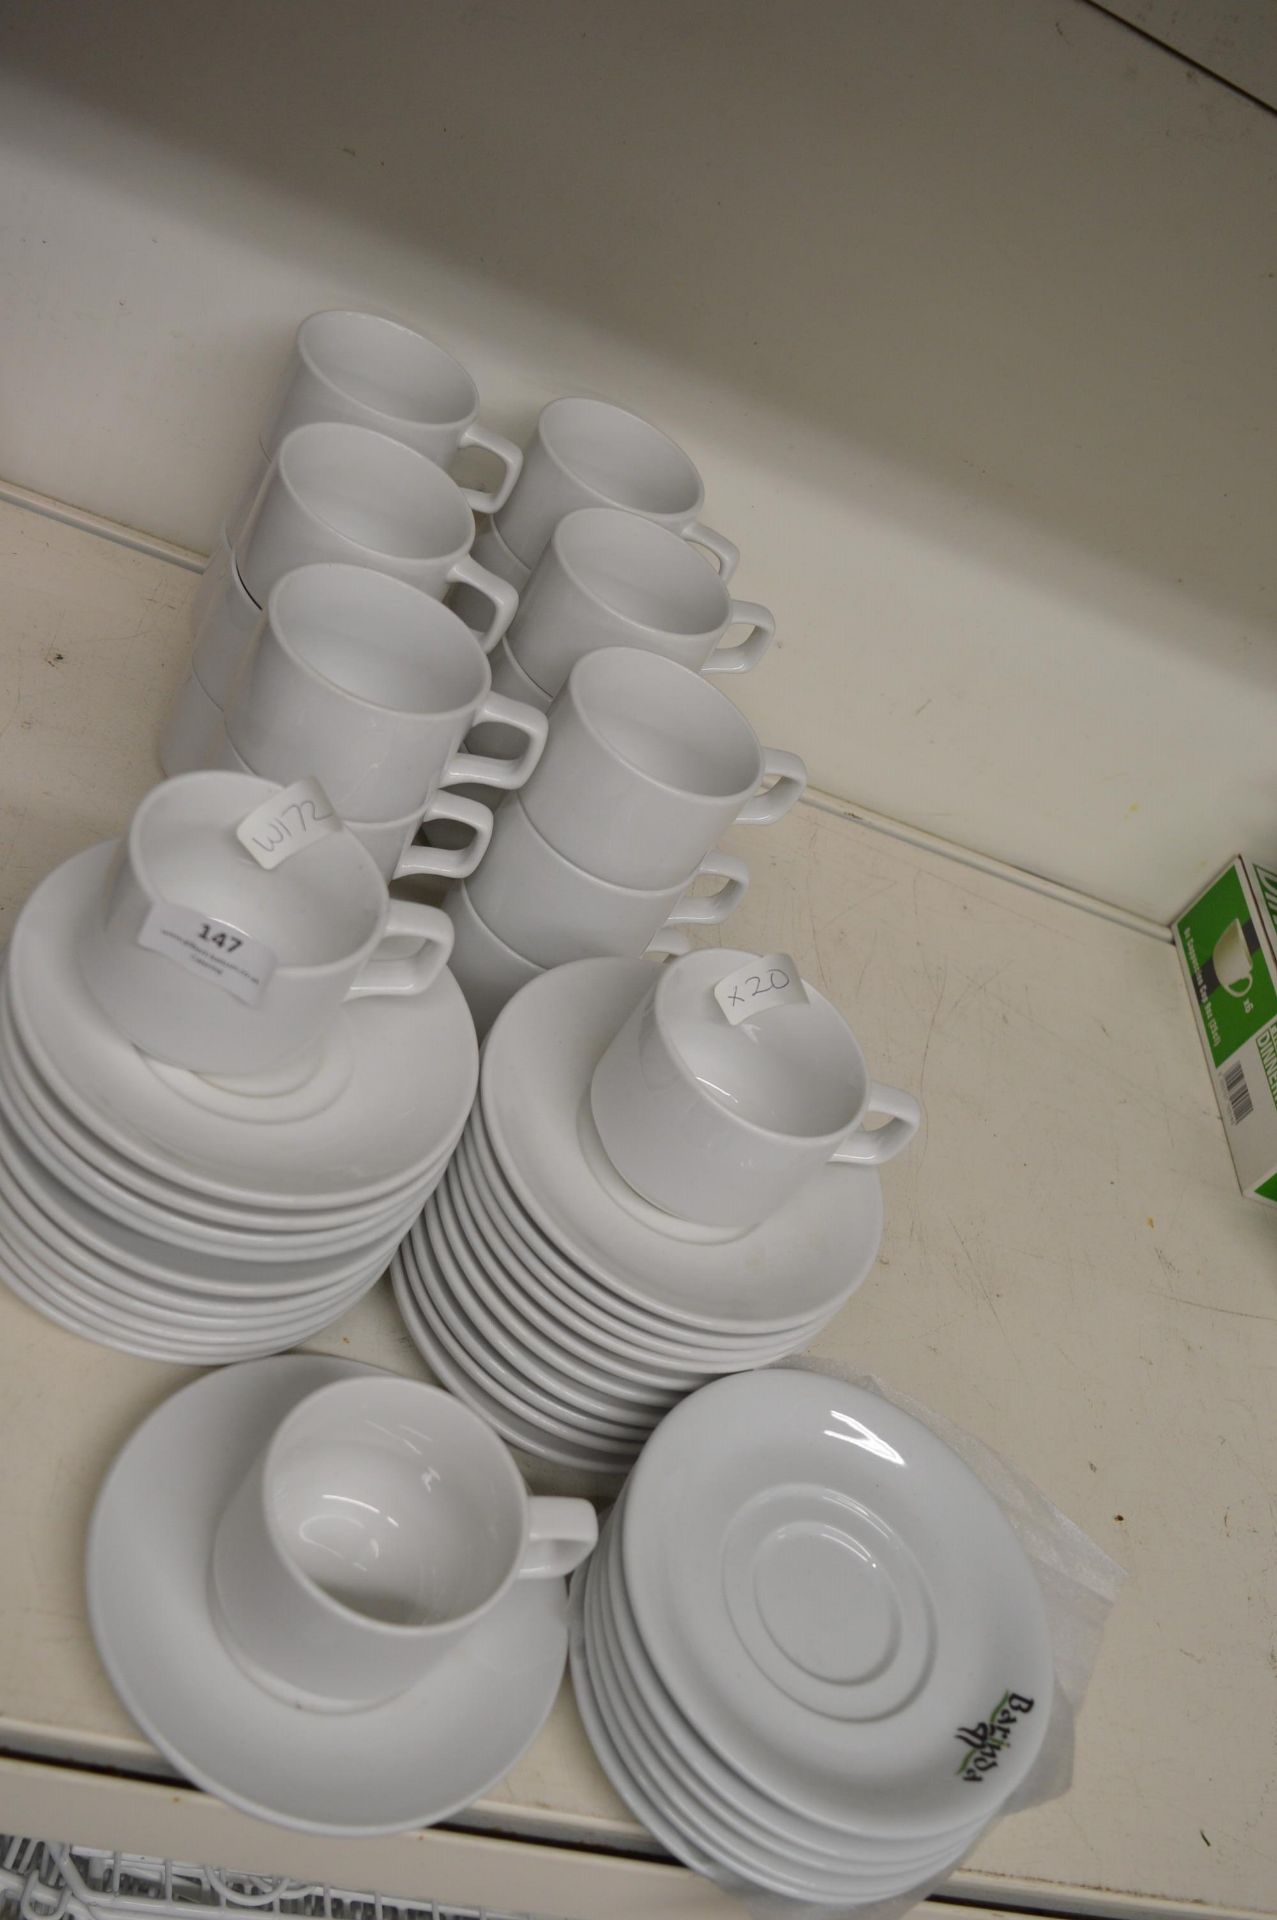 21 Cups and Saucers, and Five Others